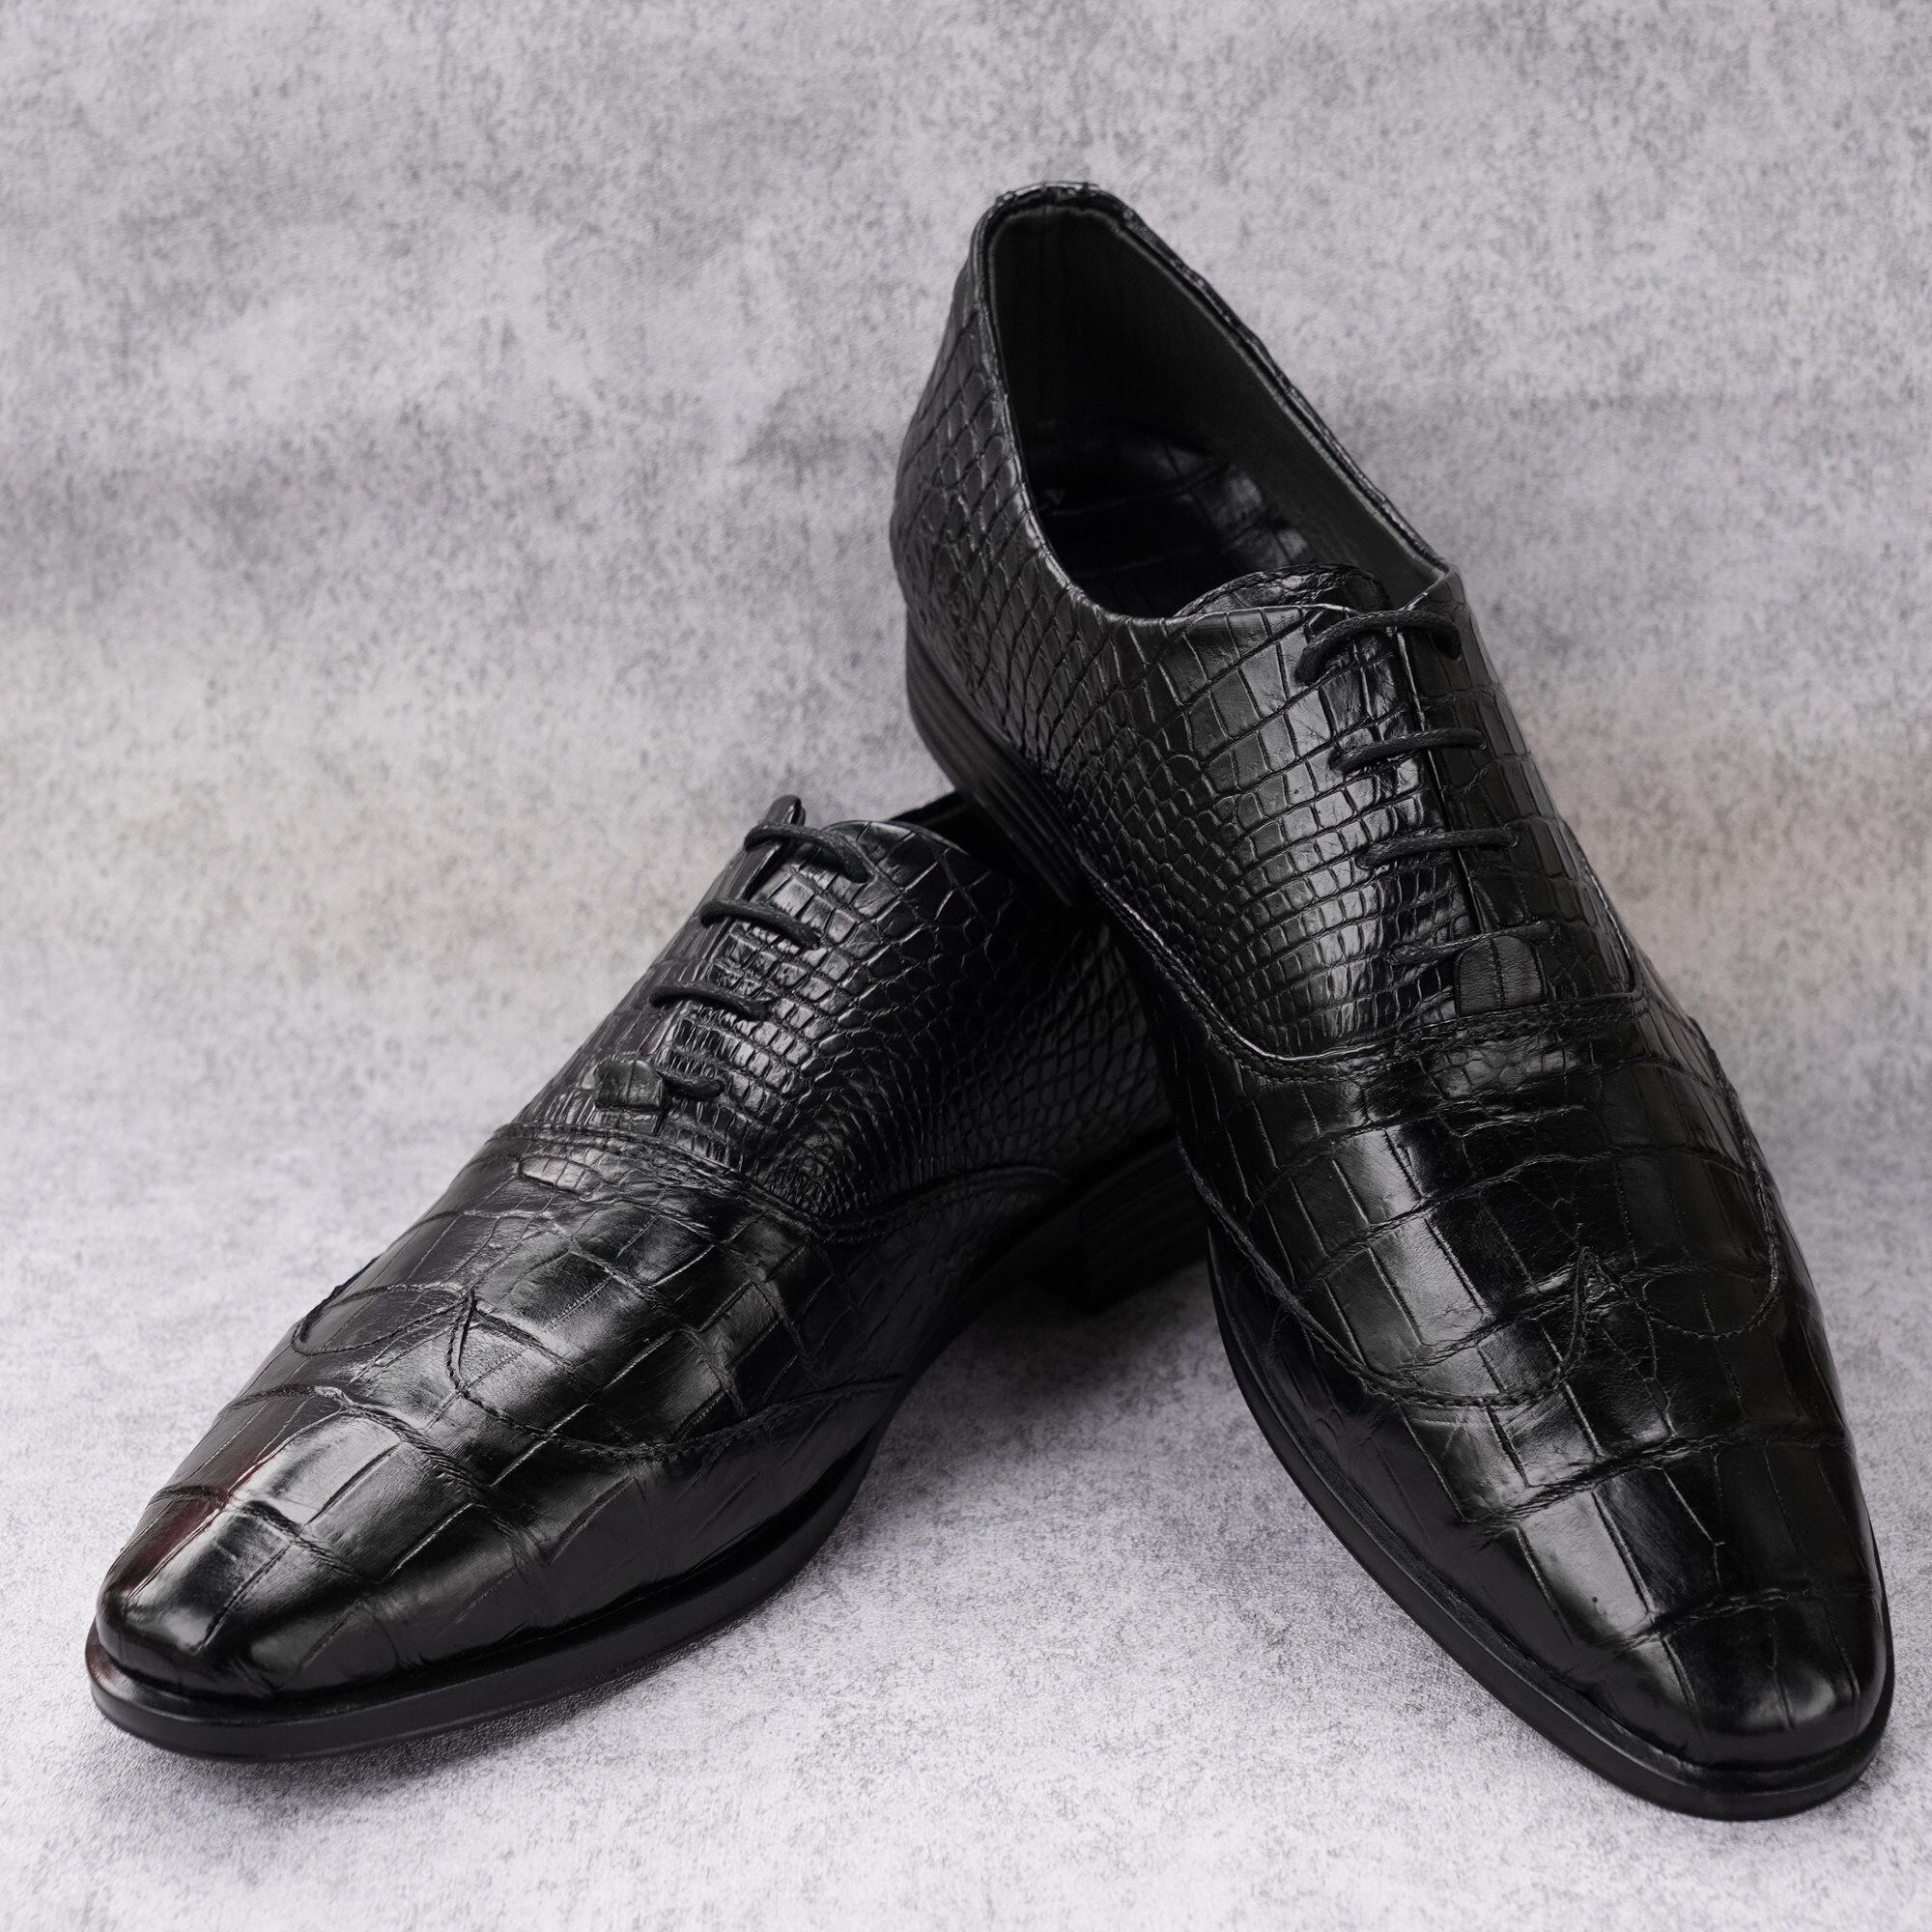 Classic Alligator Leather Wholecut Dress Shoes Comfortable Formal Business  Shoes